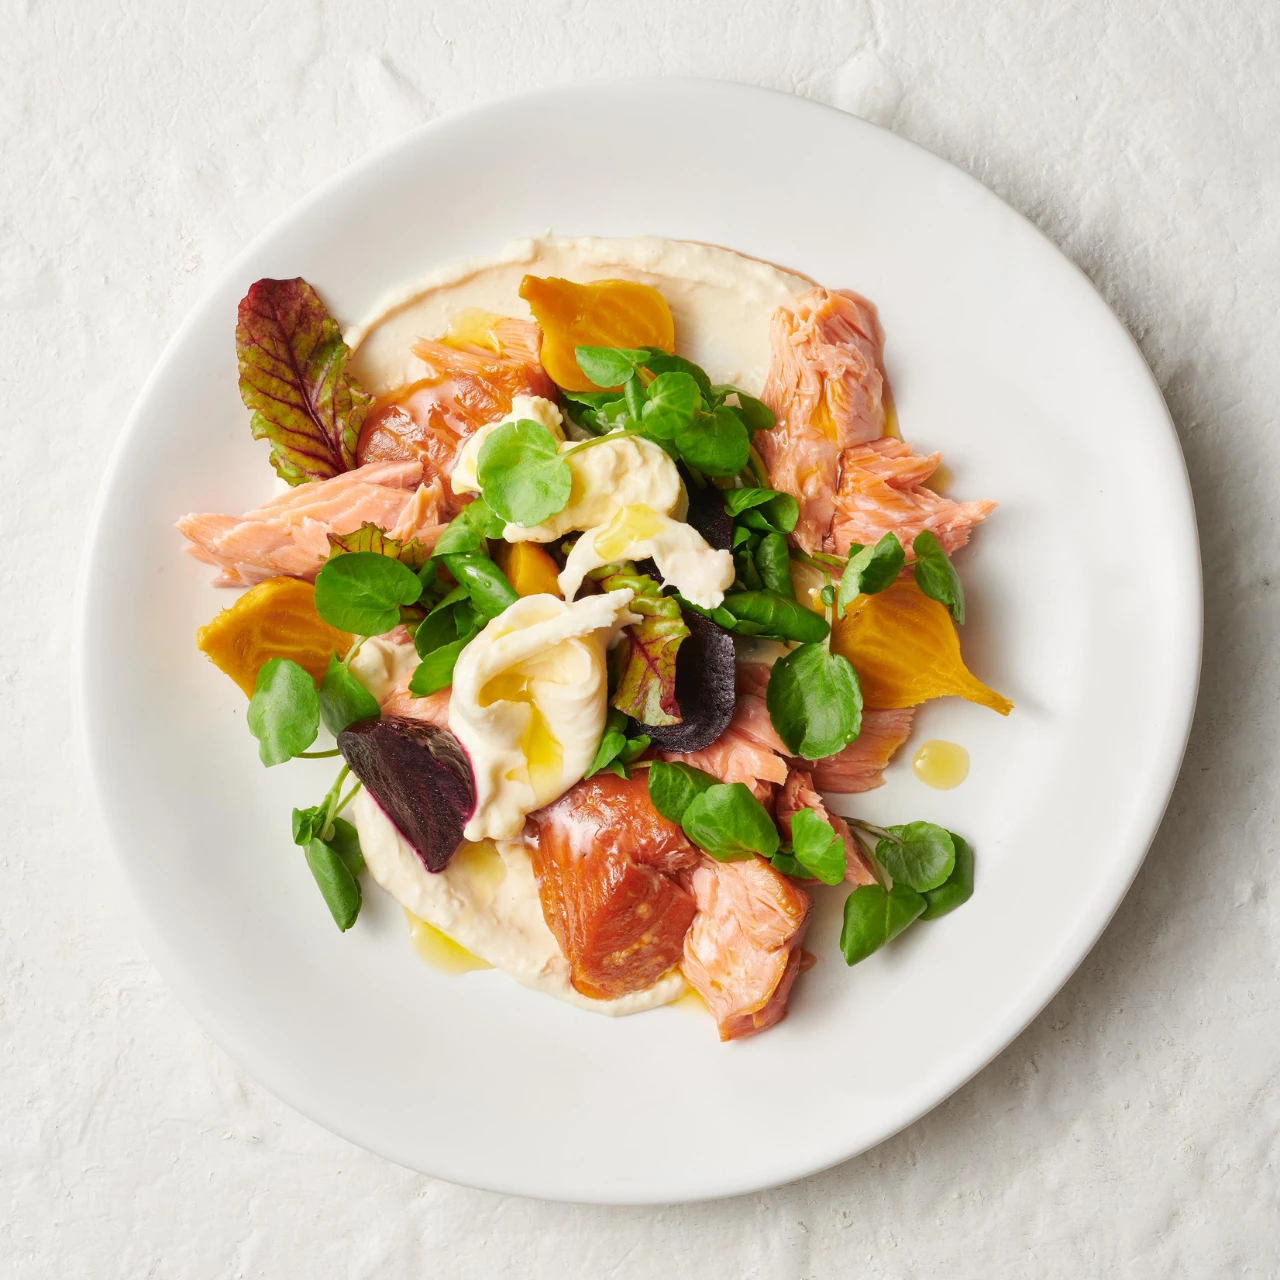 Try our Hot Smoked NZ King Salmon with Roast Beetroot, Burrata and Horseradish Dressing recipe. It's easy and delicious!